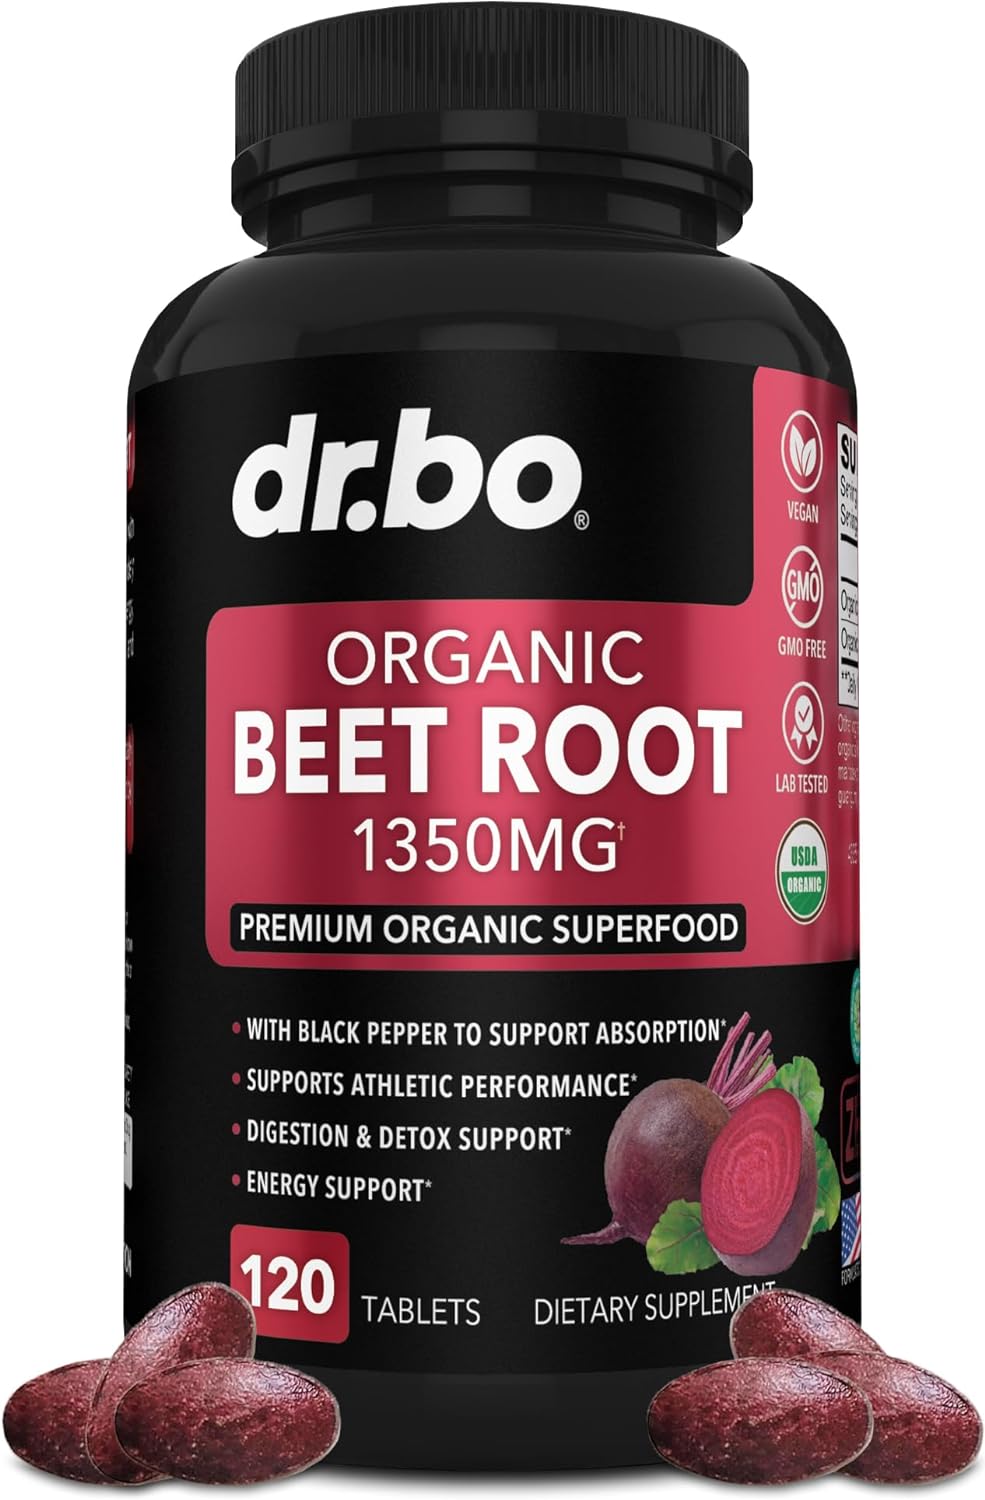 Organic Beet Root Capsules Supplements - 1350mg Beetroot Powder Extract Pills, Organic Beet Root Powder Supplement, Super Nitric Oxide Beets, High Circulation Beet Vitamins Support - 120 Beet Tablets